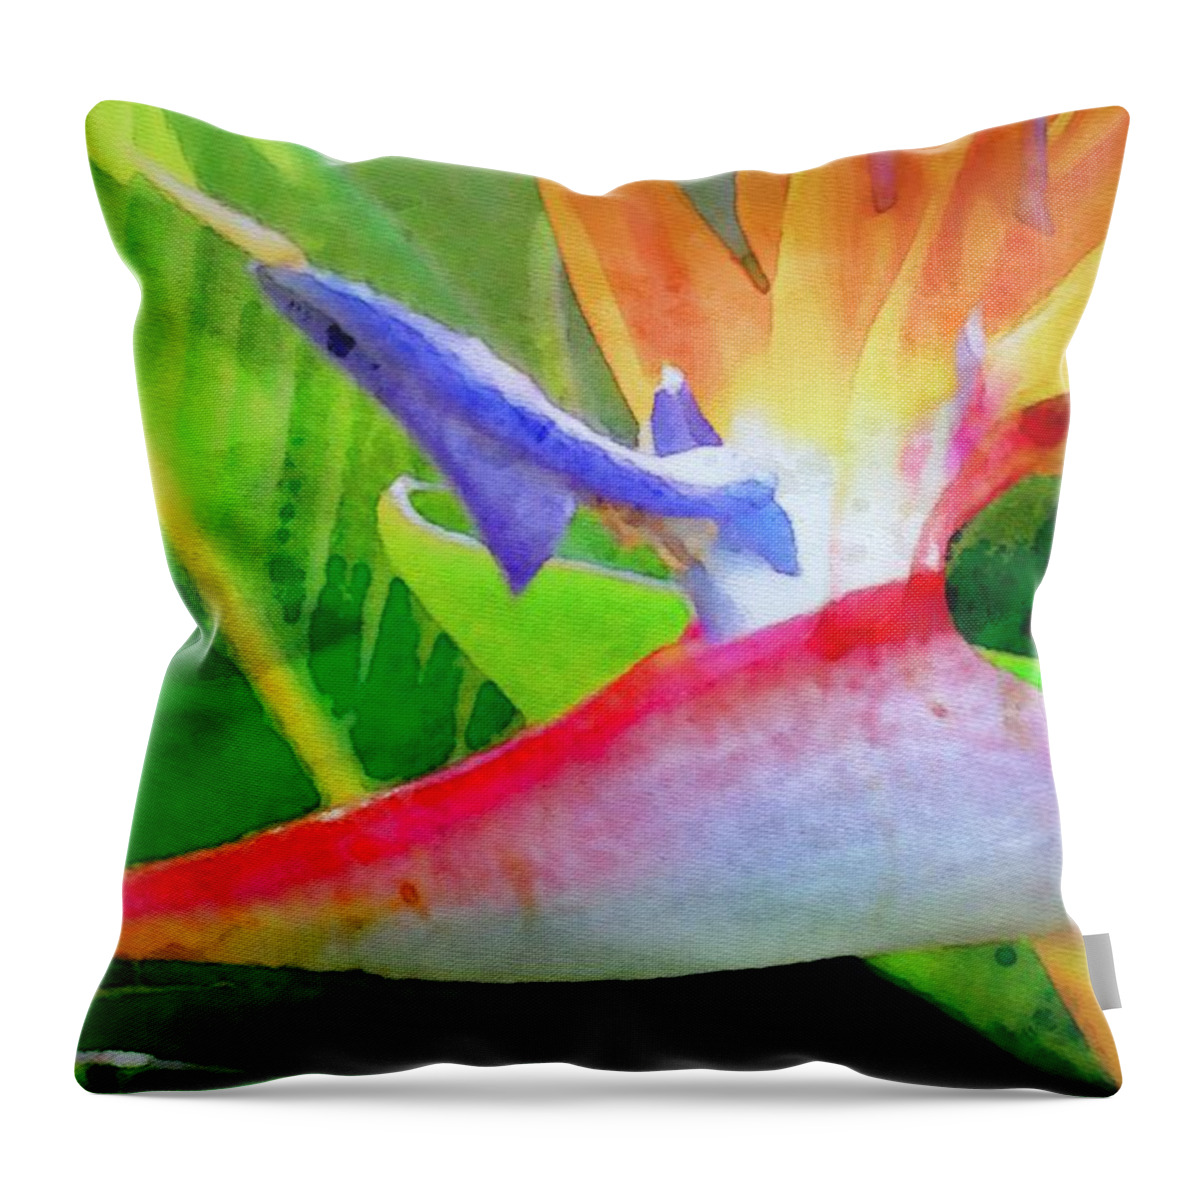 Bird Of Paradise Throw Pillow featuring the digital art Natural High by James Temple